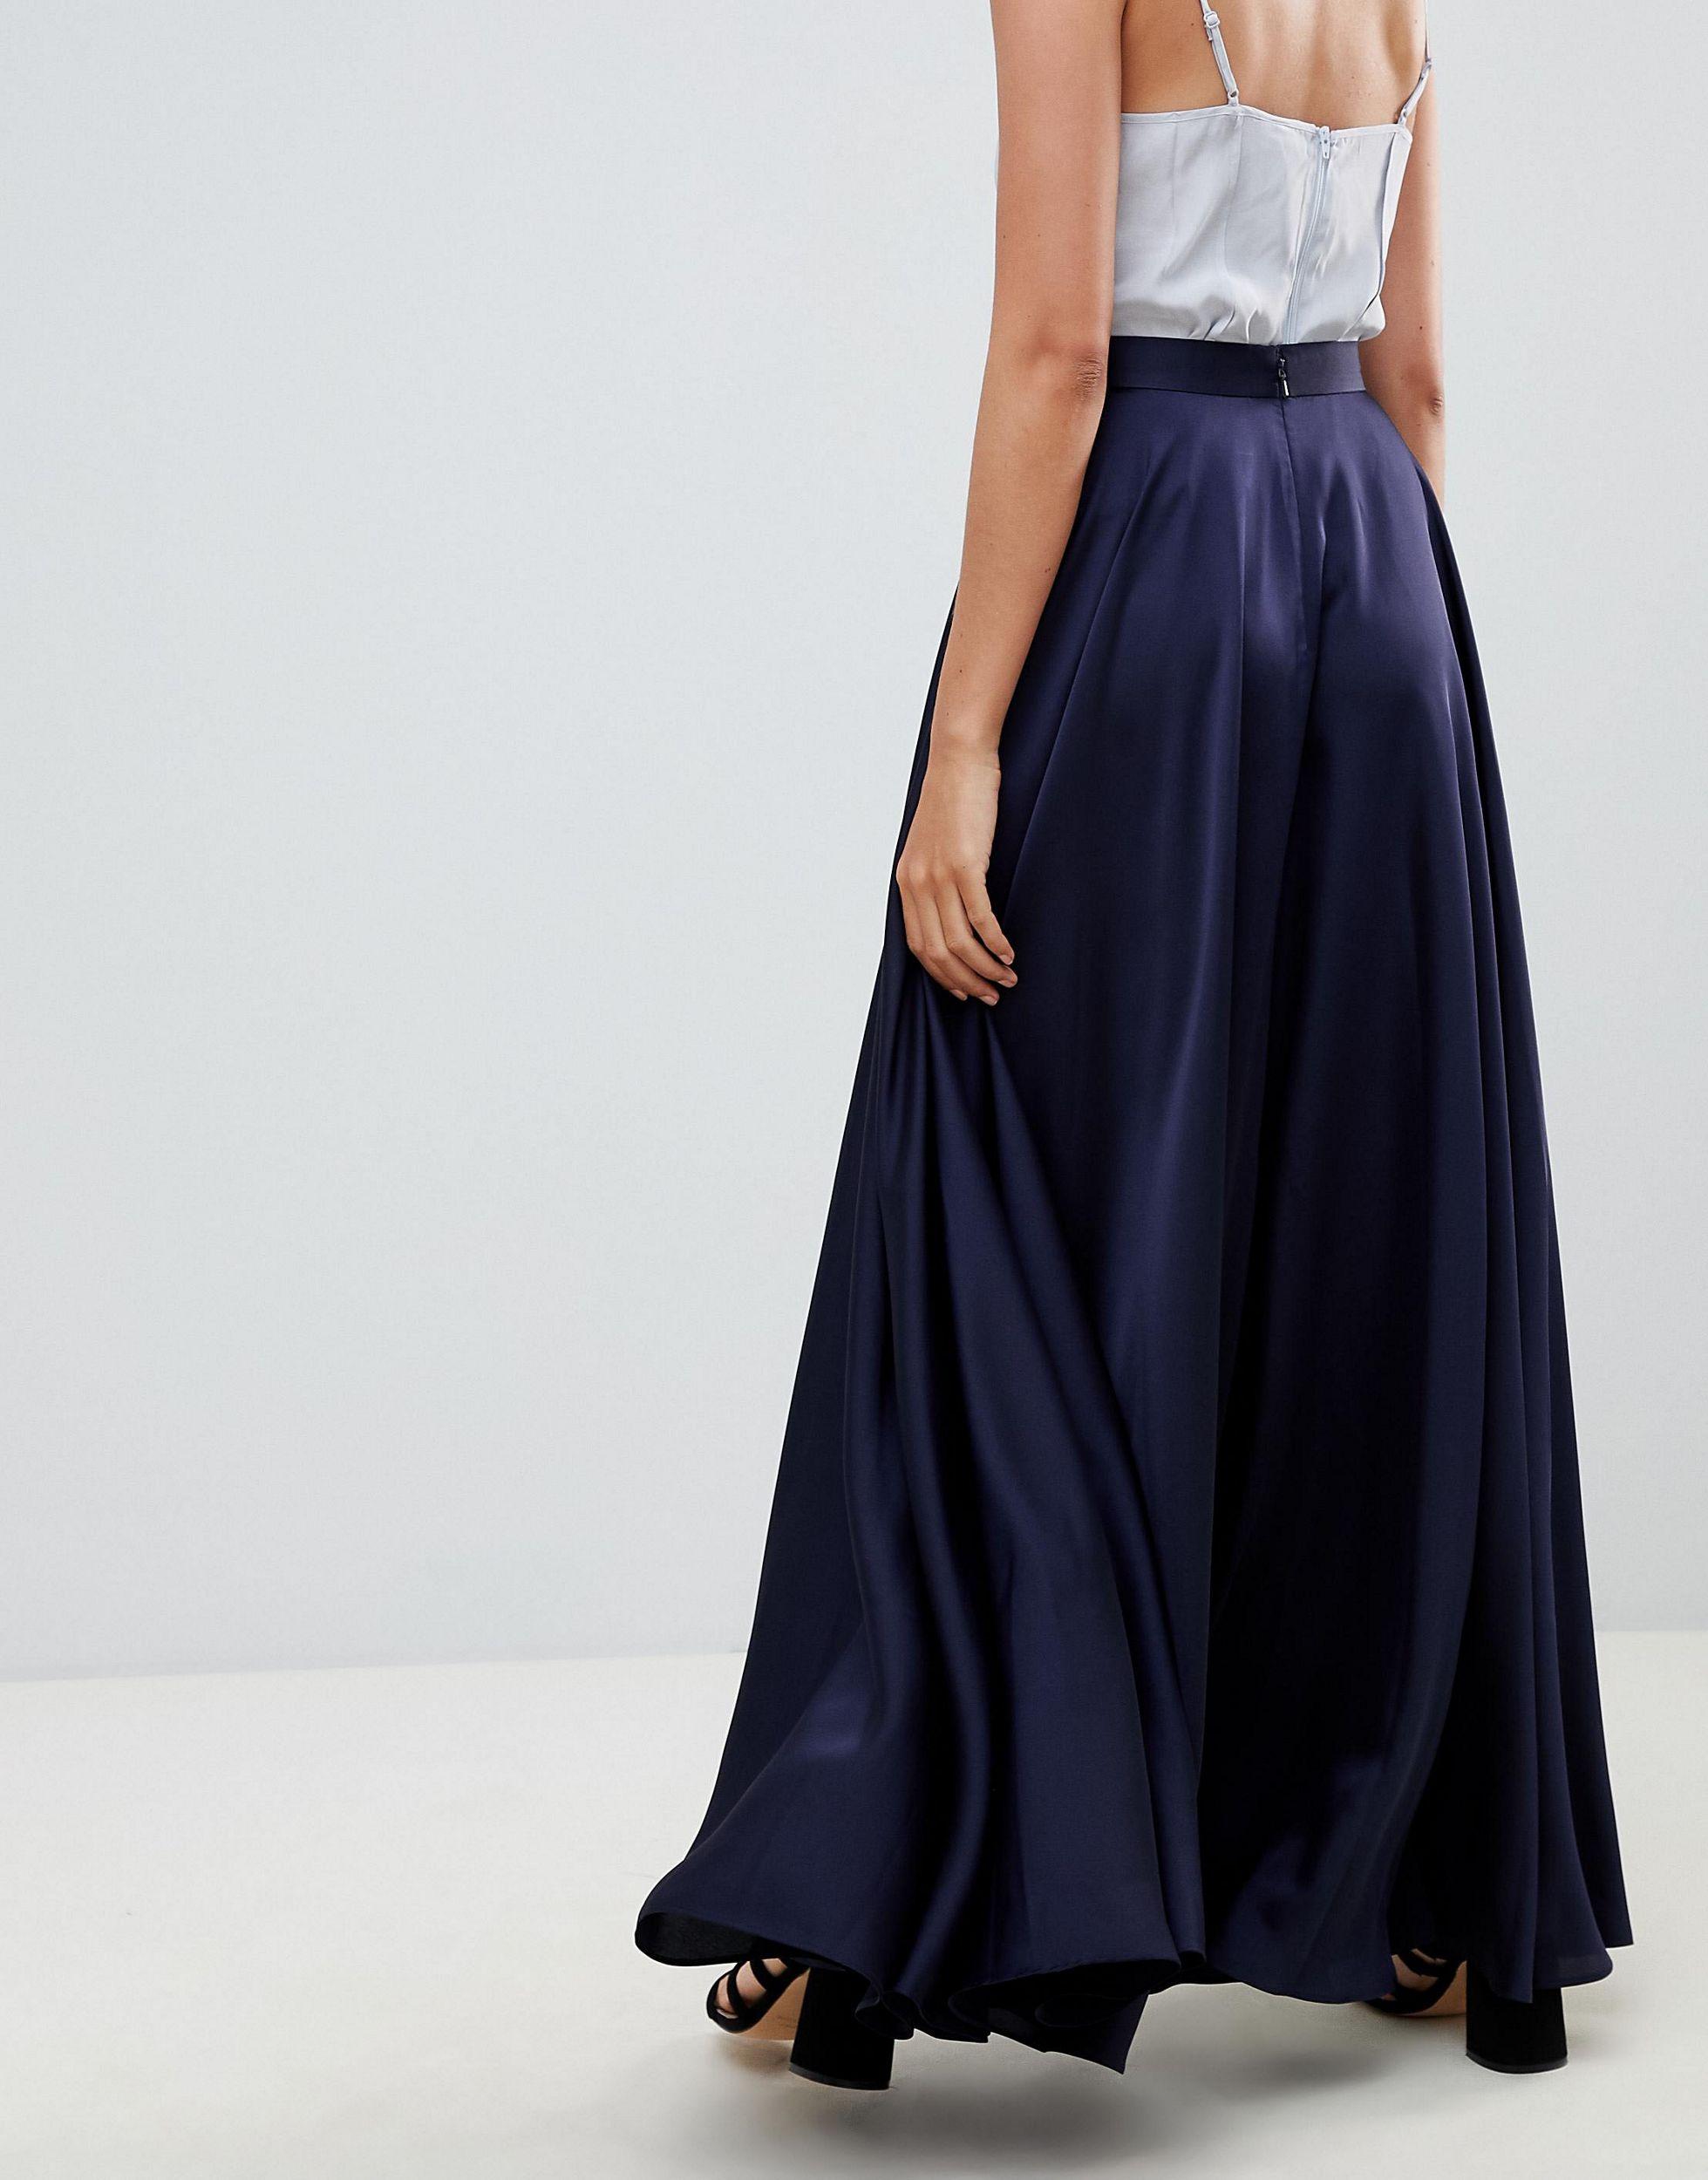 Asos Satin Maxi Skirt Outlet Store, UP ...